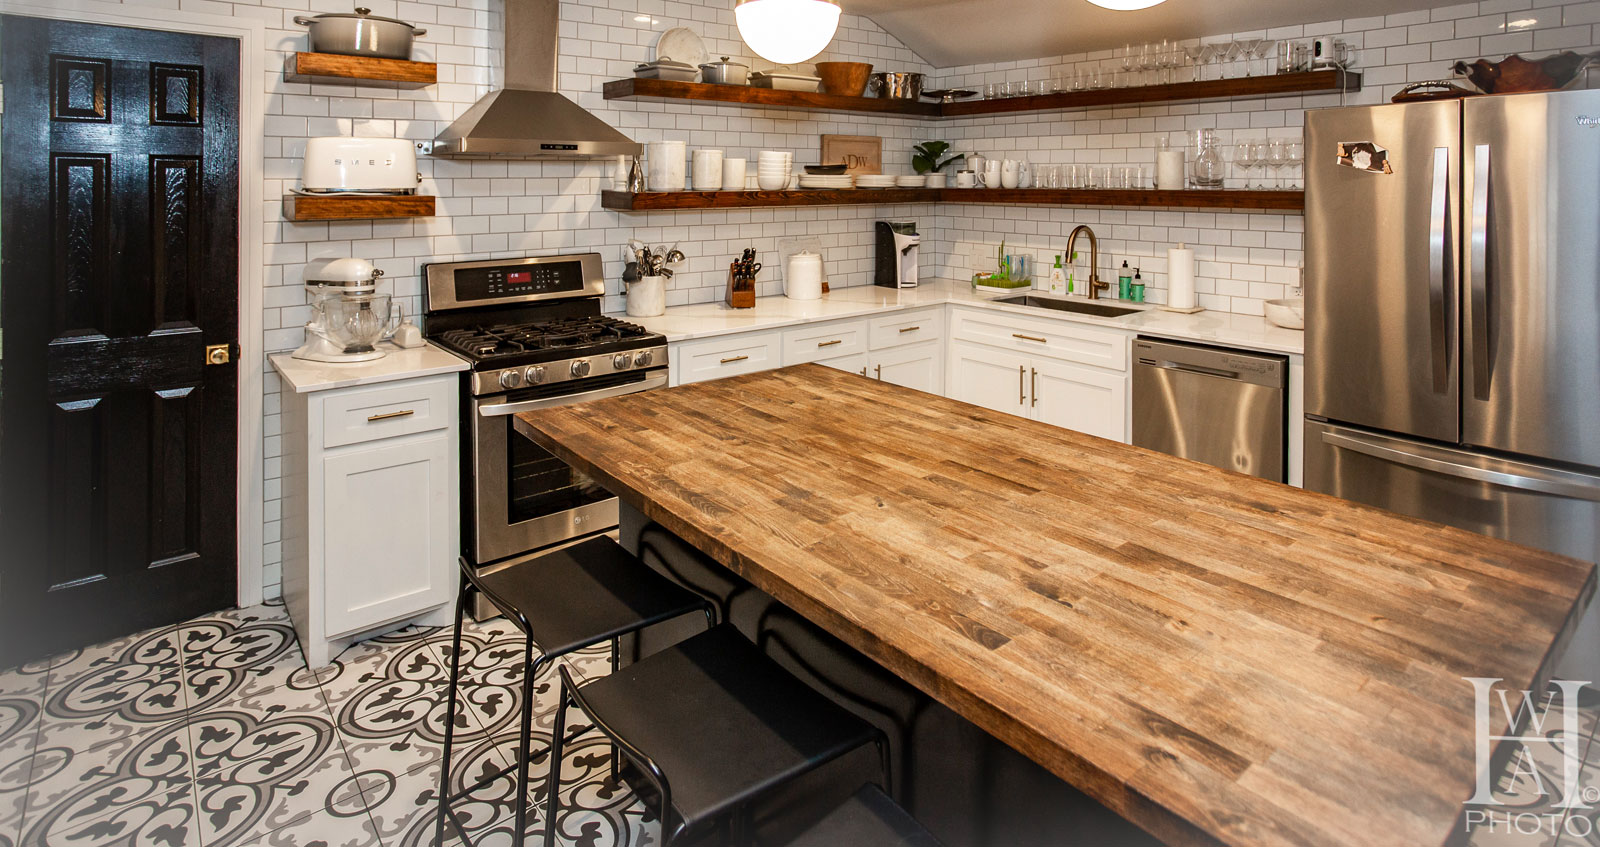 Kitchen Interior with long wooden table